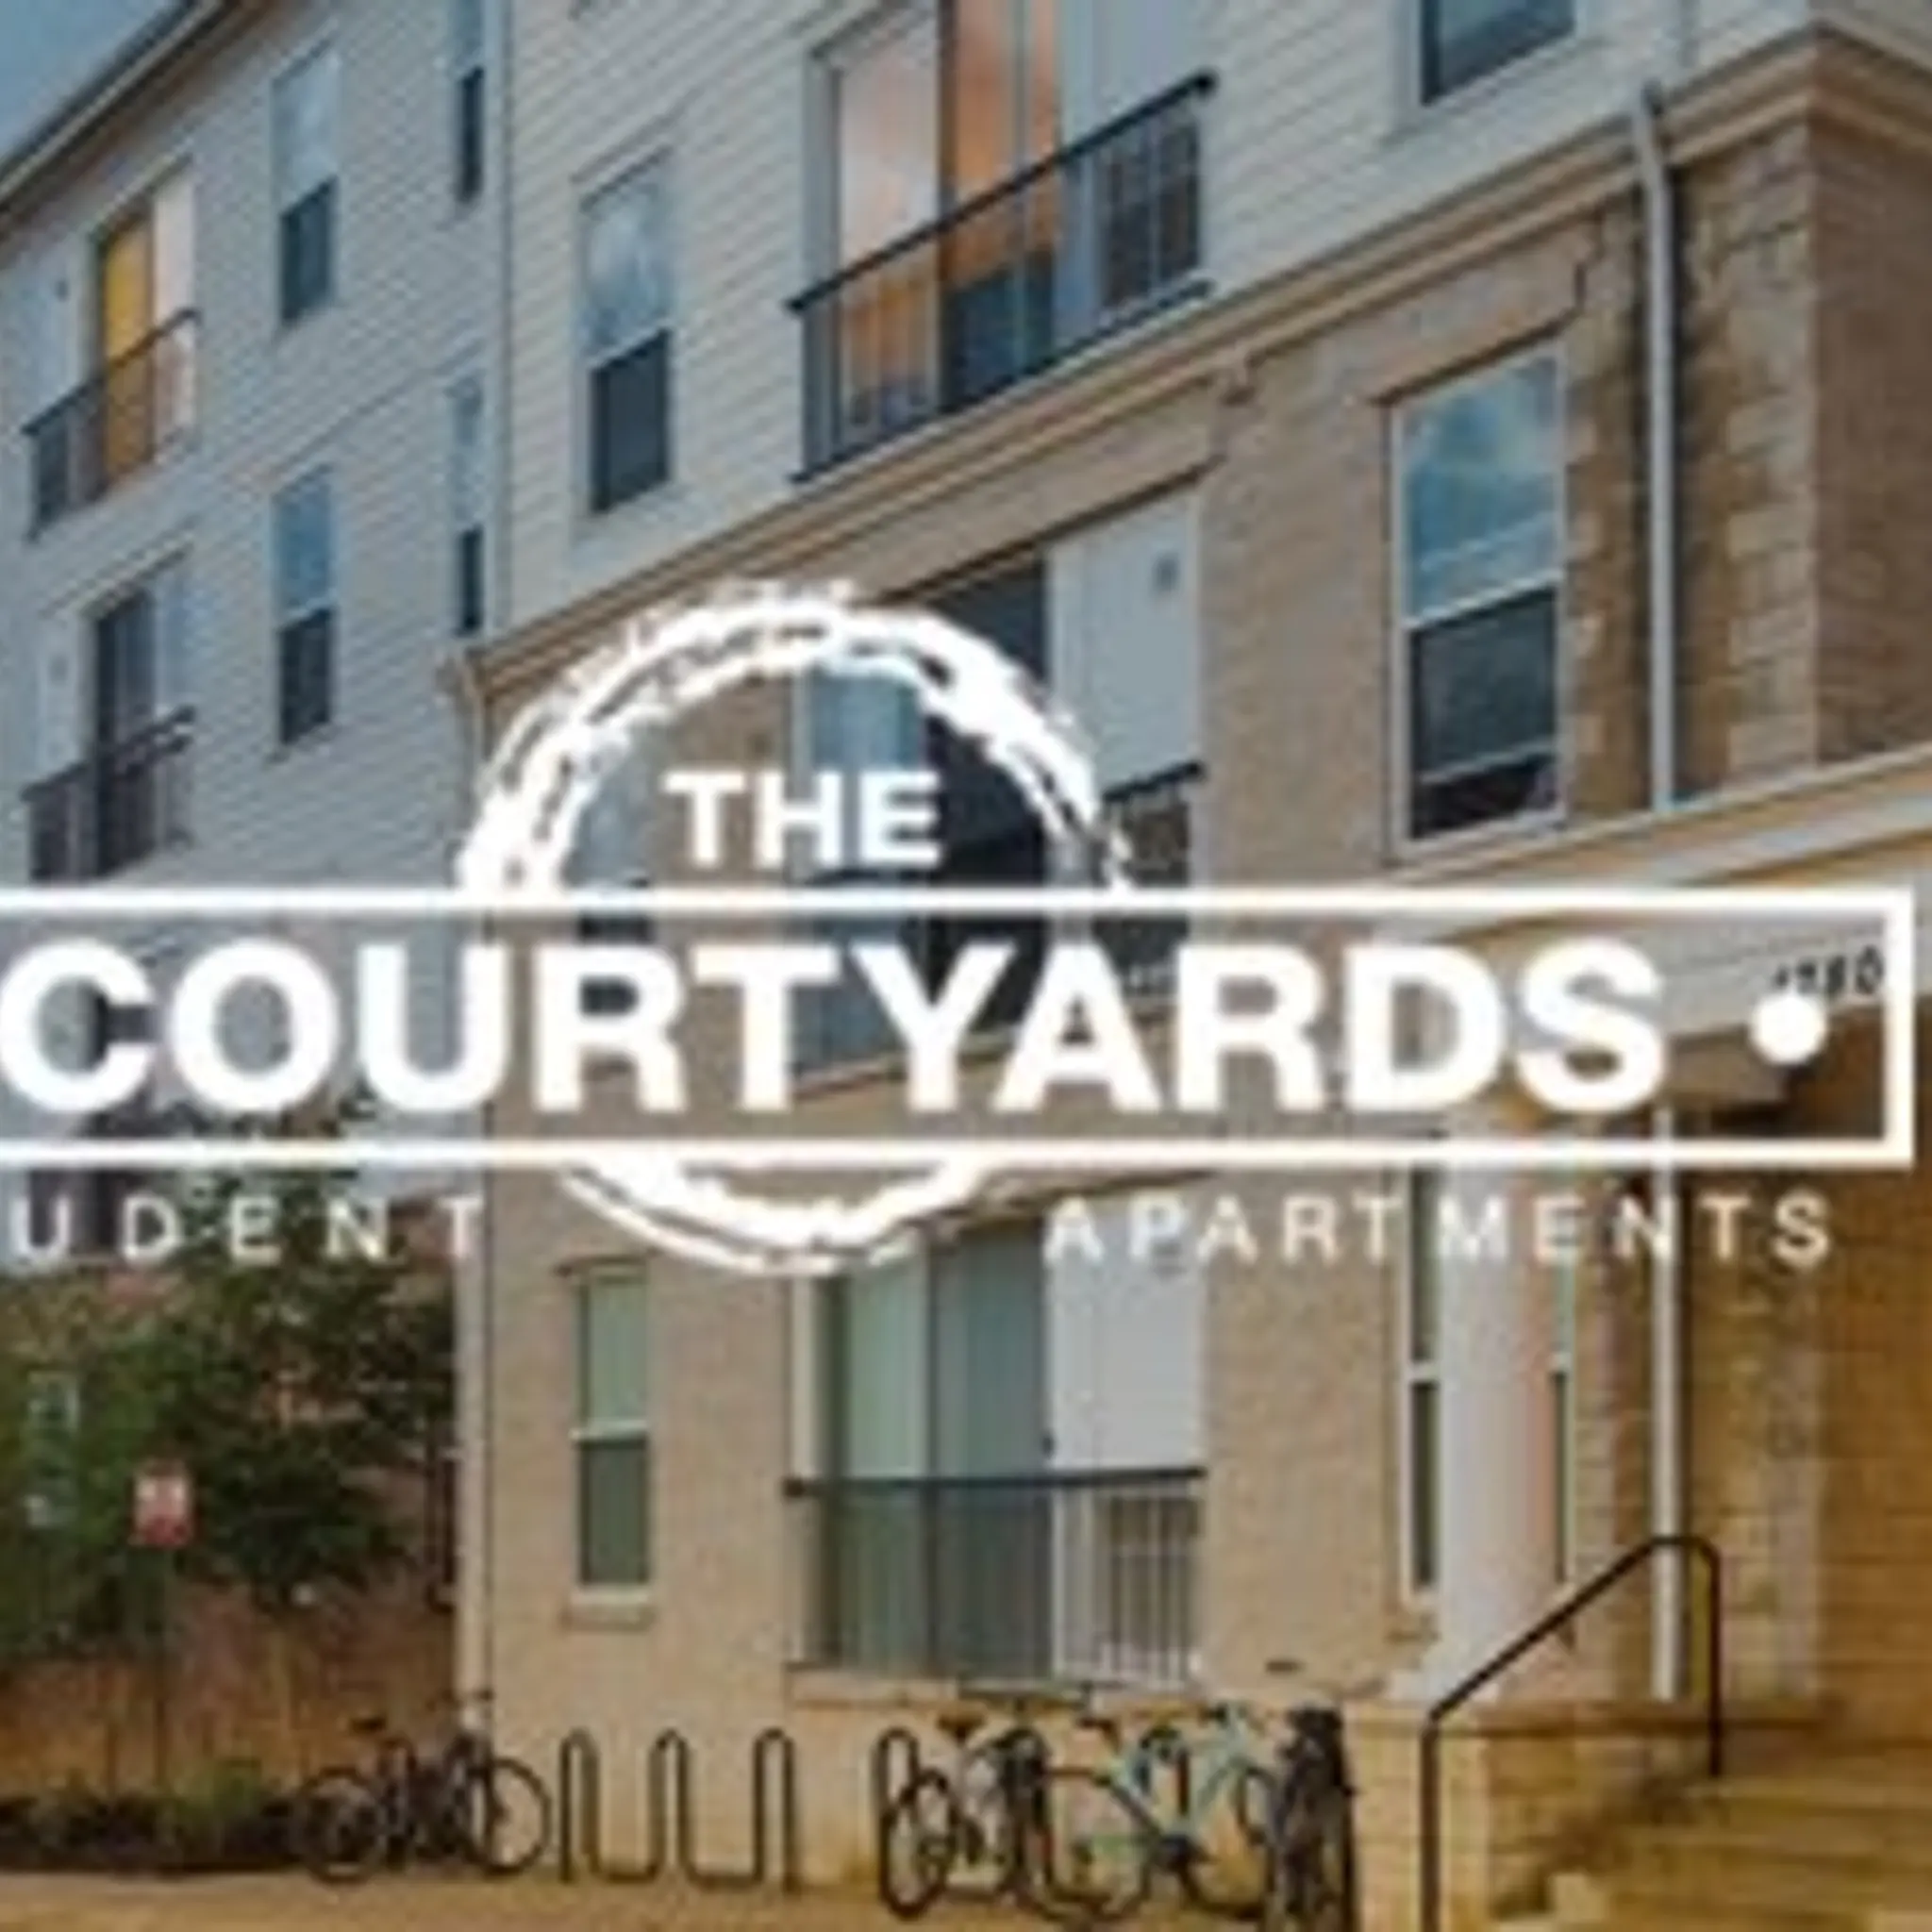 University of Michigan Student Apartments | The Courtyards